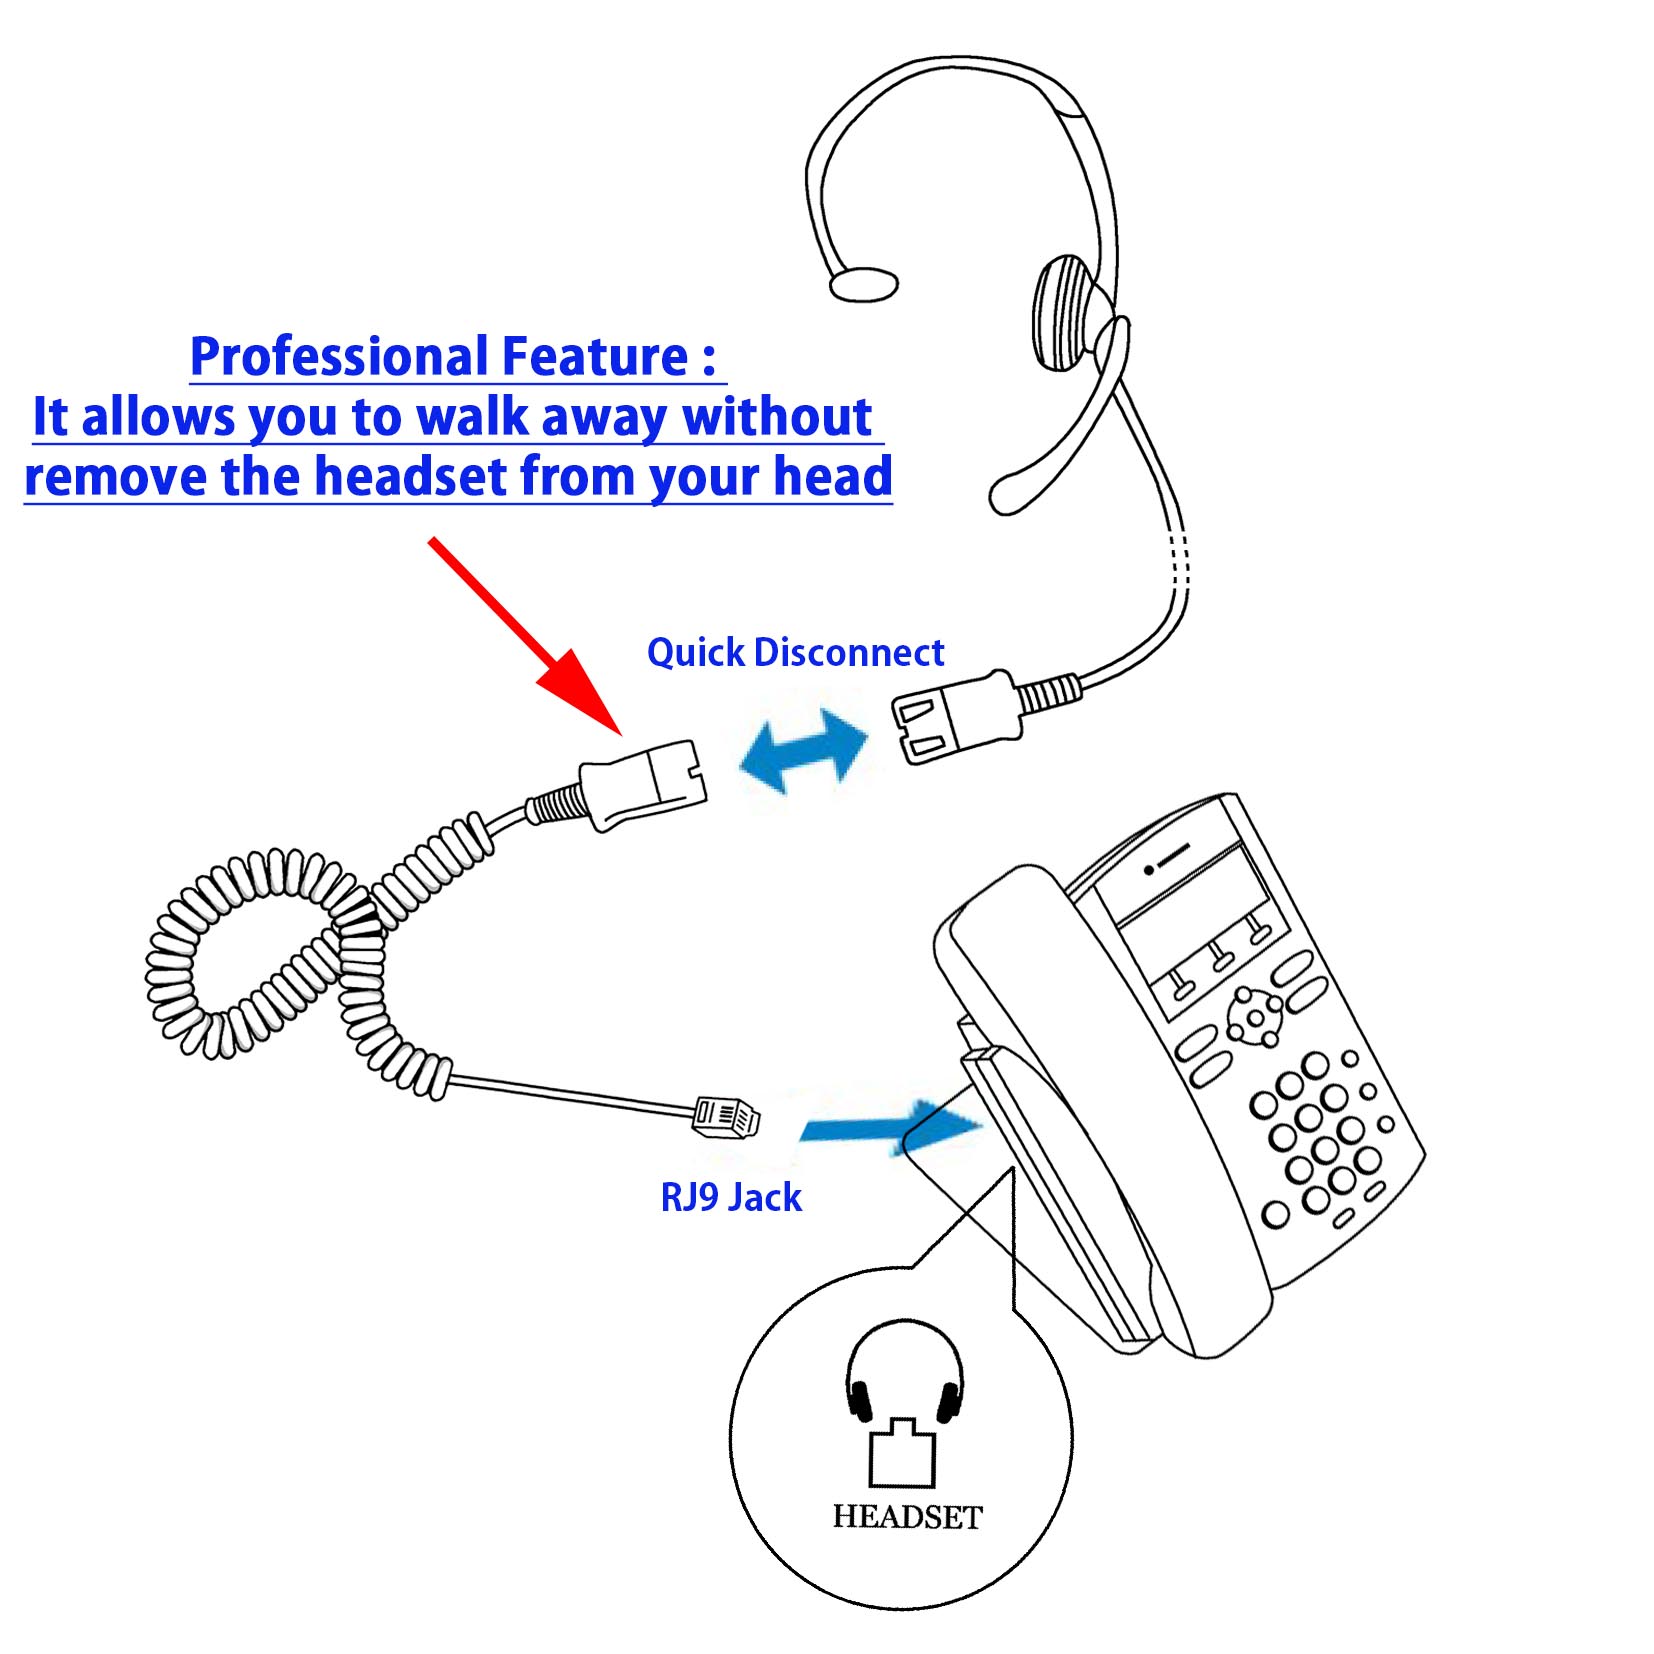 Office Phone Headset with Virtual Compatibility RJ9 Headset Adapter for Cisco Avaya Panasonic and Most Phones - image 2 of 8